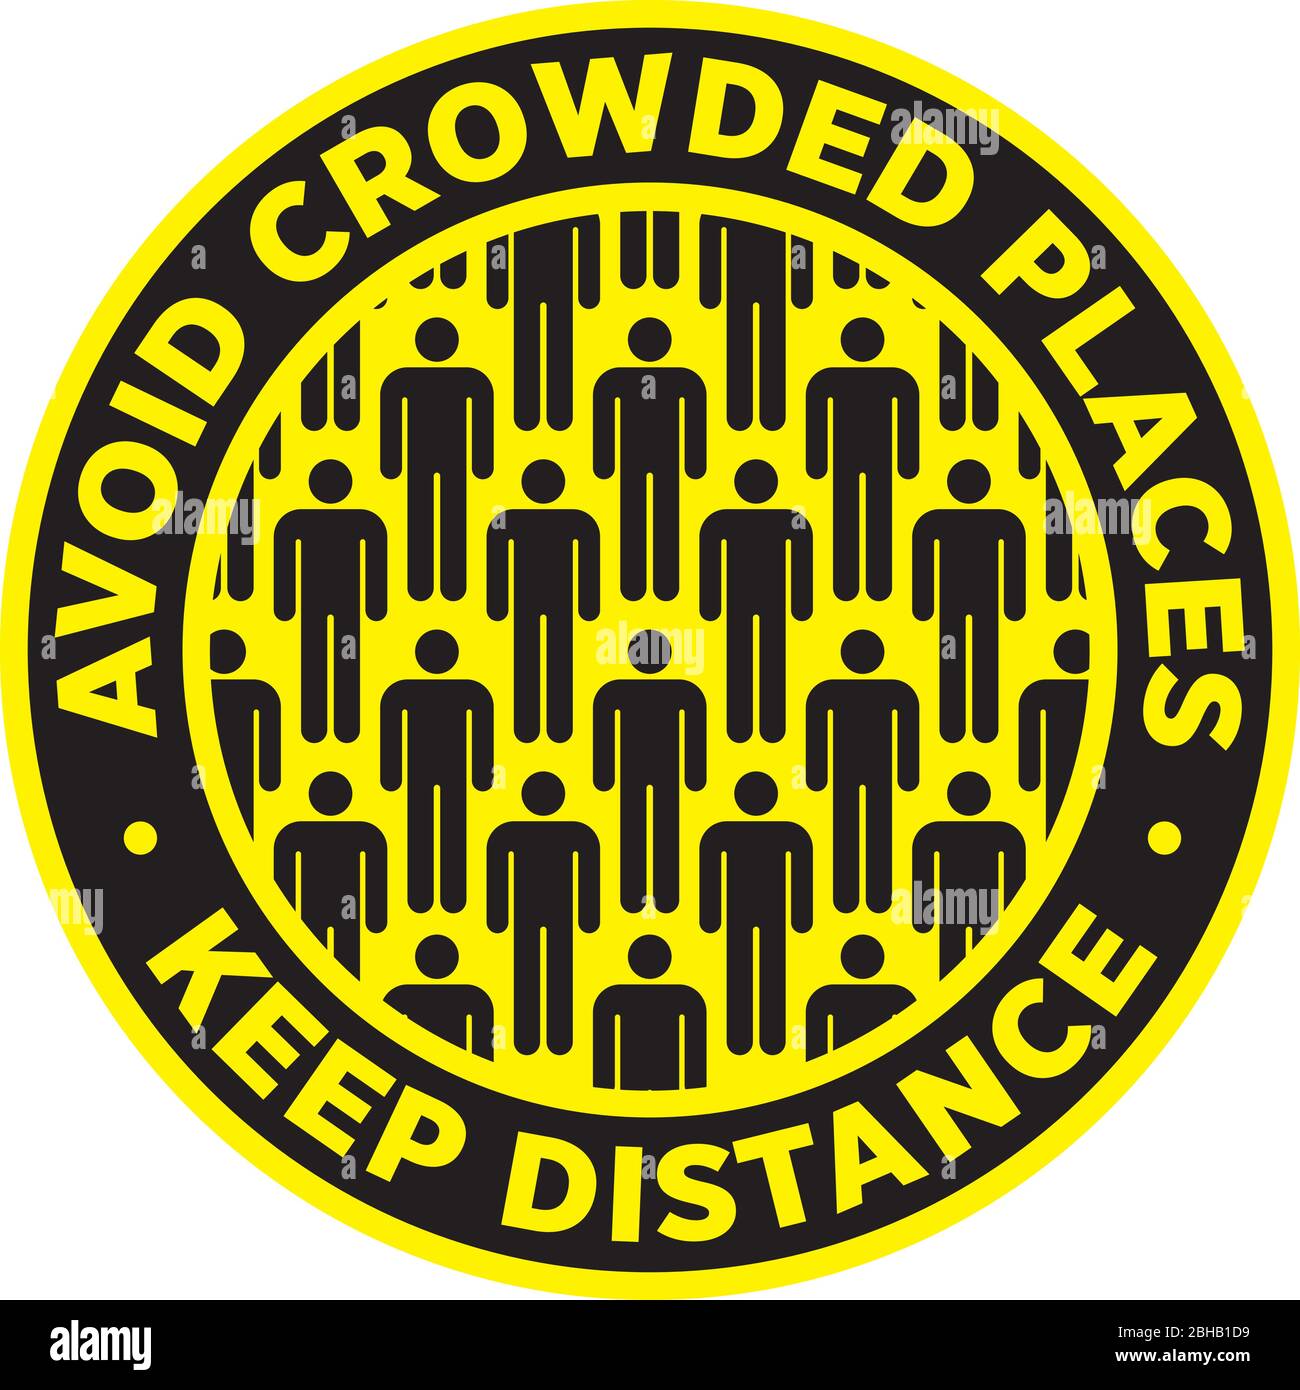 Avoid Crowded Places Keep Social Distance Sticker for help reduce the risk of catching coronavirus Covid-19. Vector sign. Stock Vector